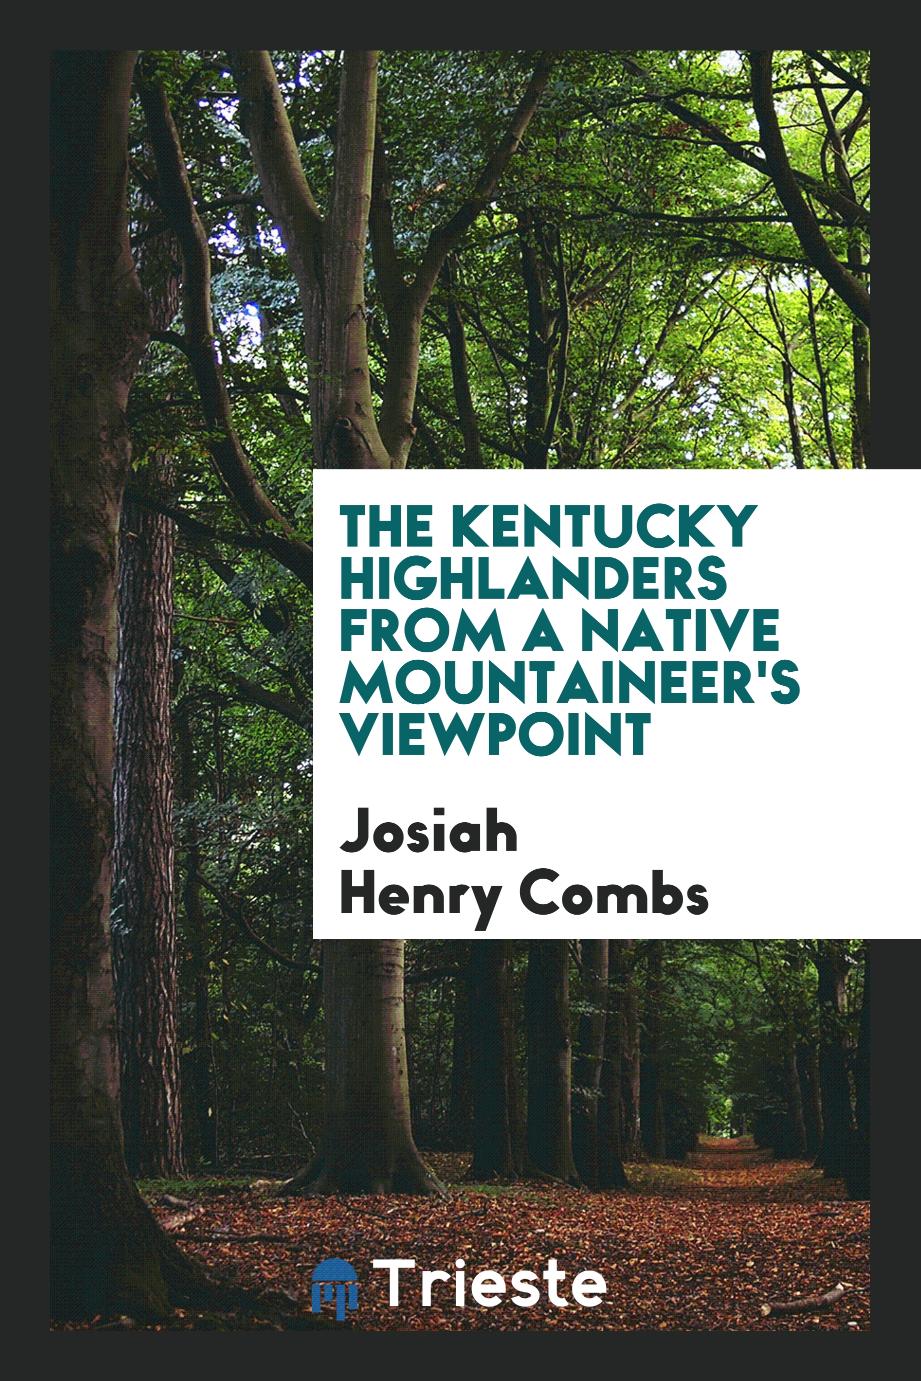 The Kentucky highlanders from a native mountaineer's viewpoint